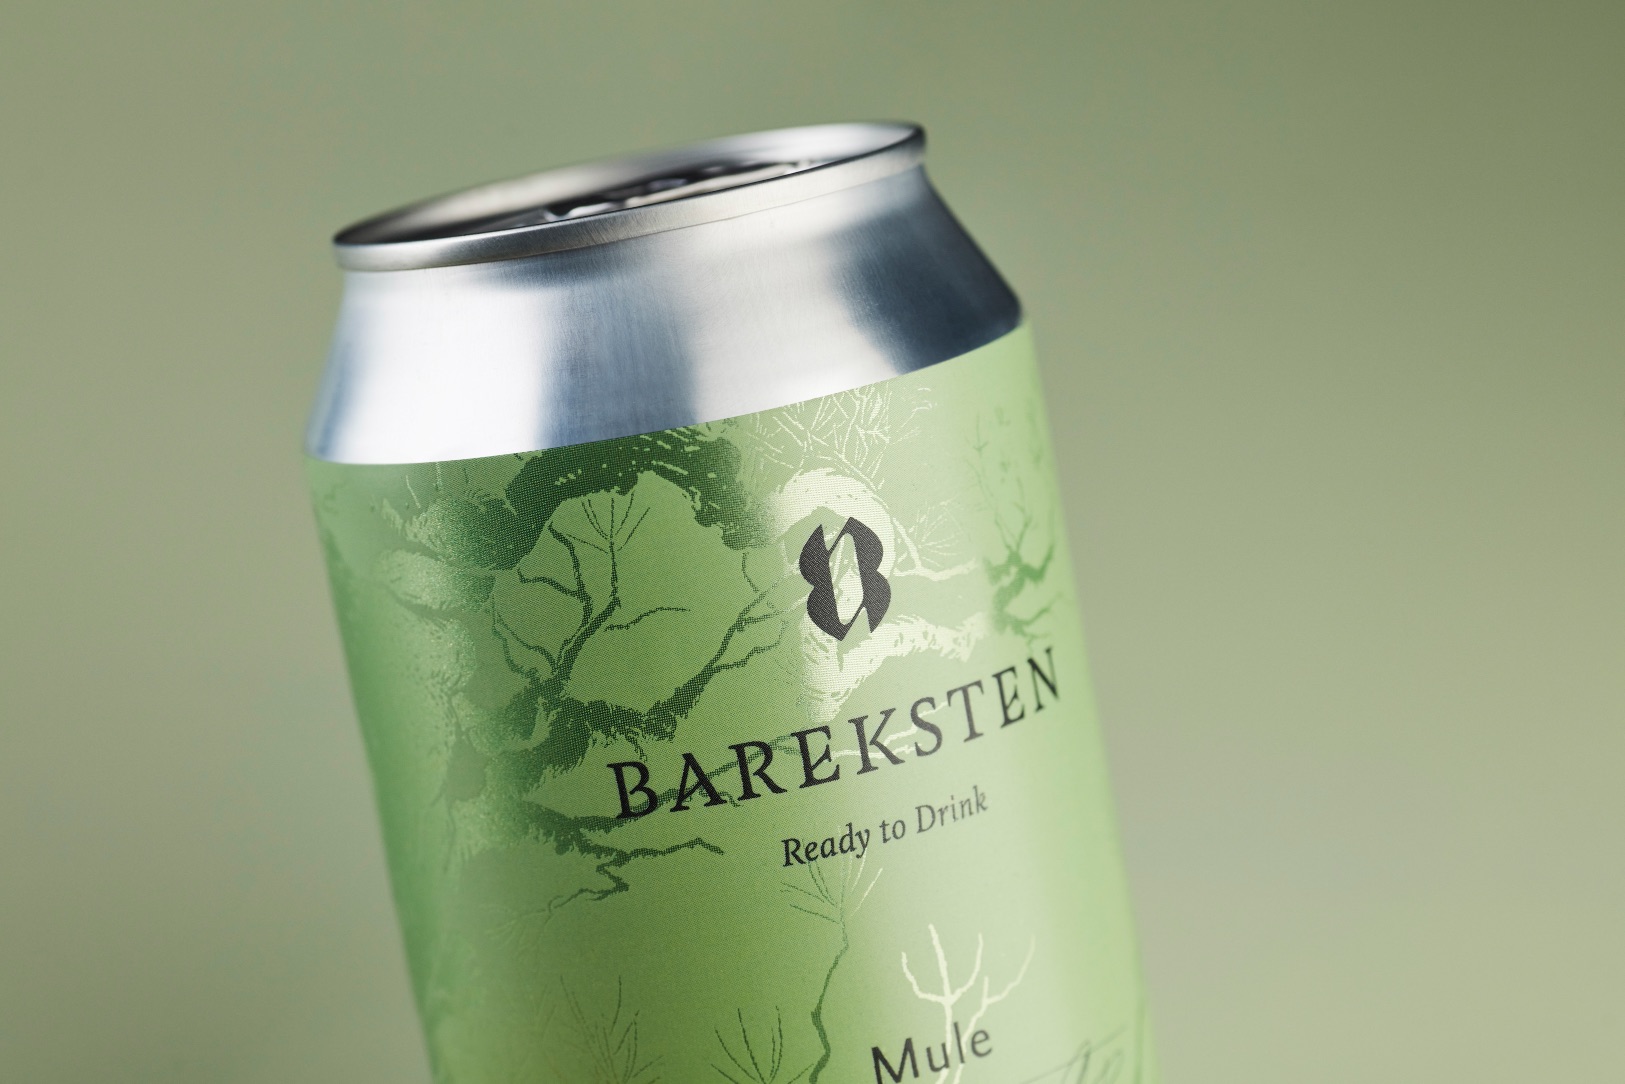 Bareksten Ready to Drink Photography and Packaging Design by Kind